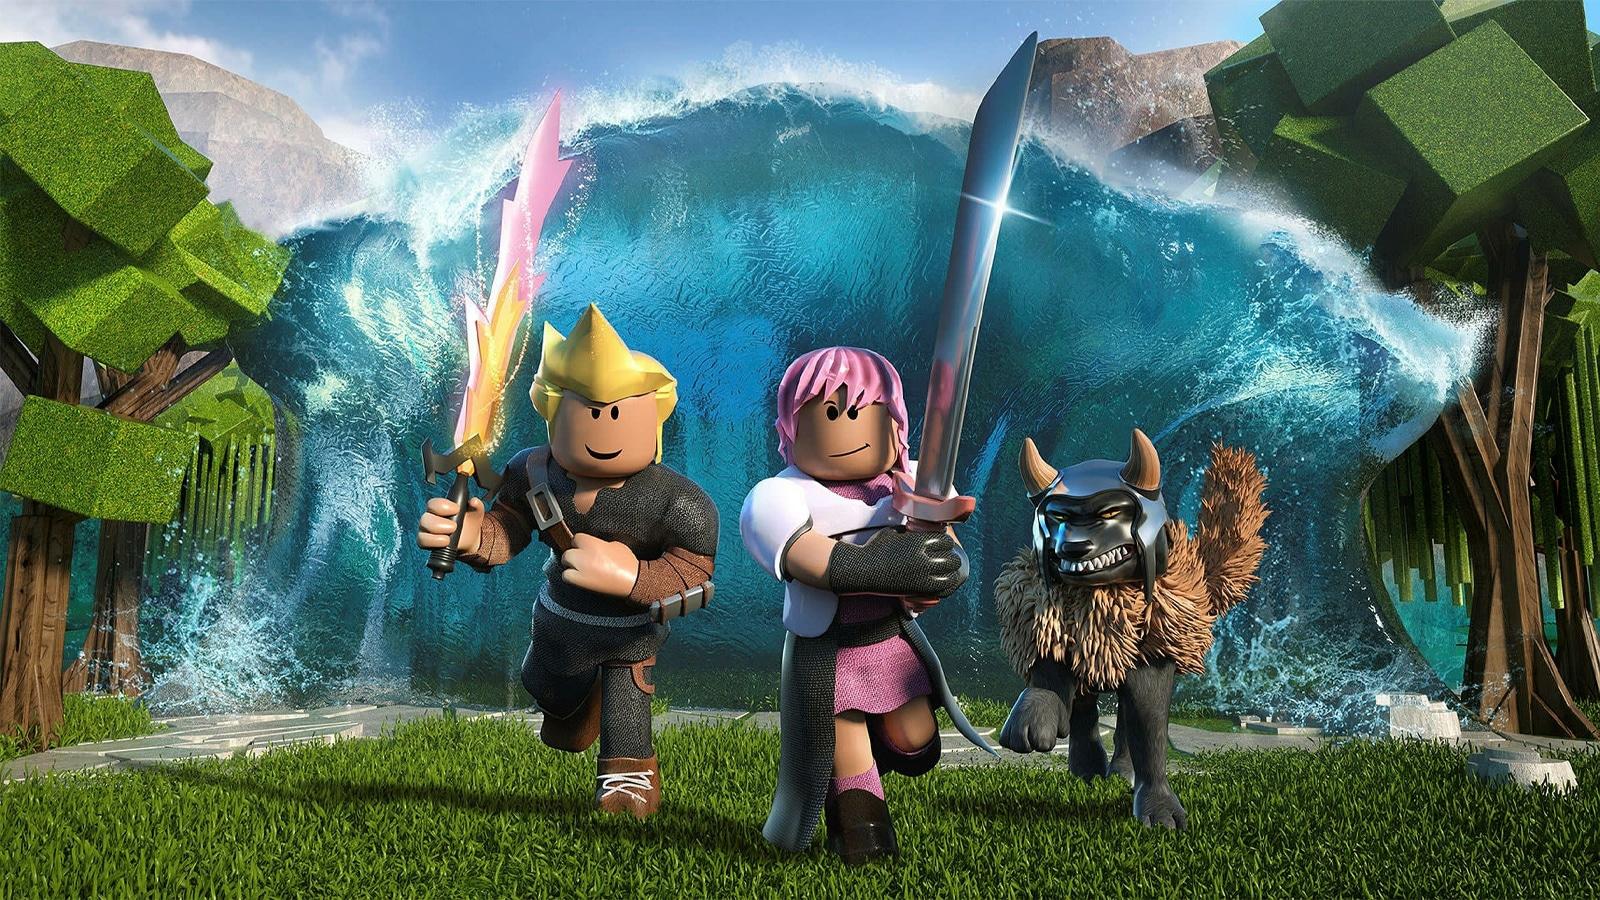 Roblox keyart with two characters holding swords